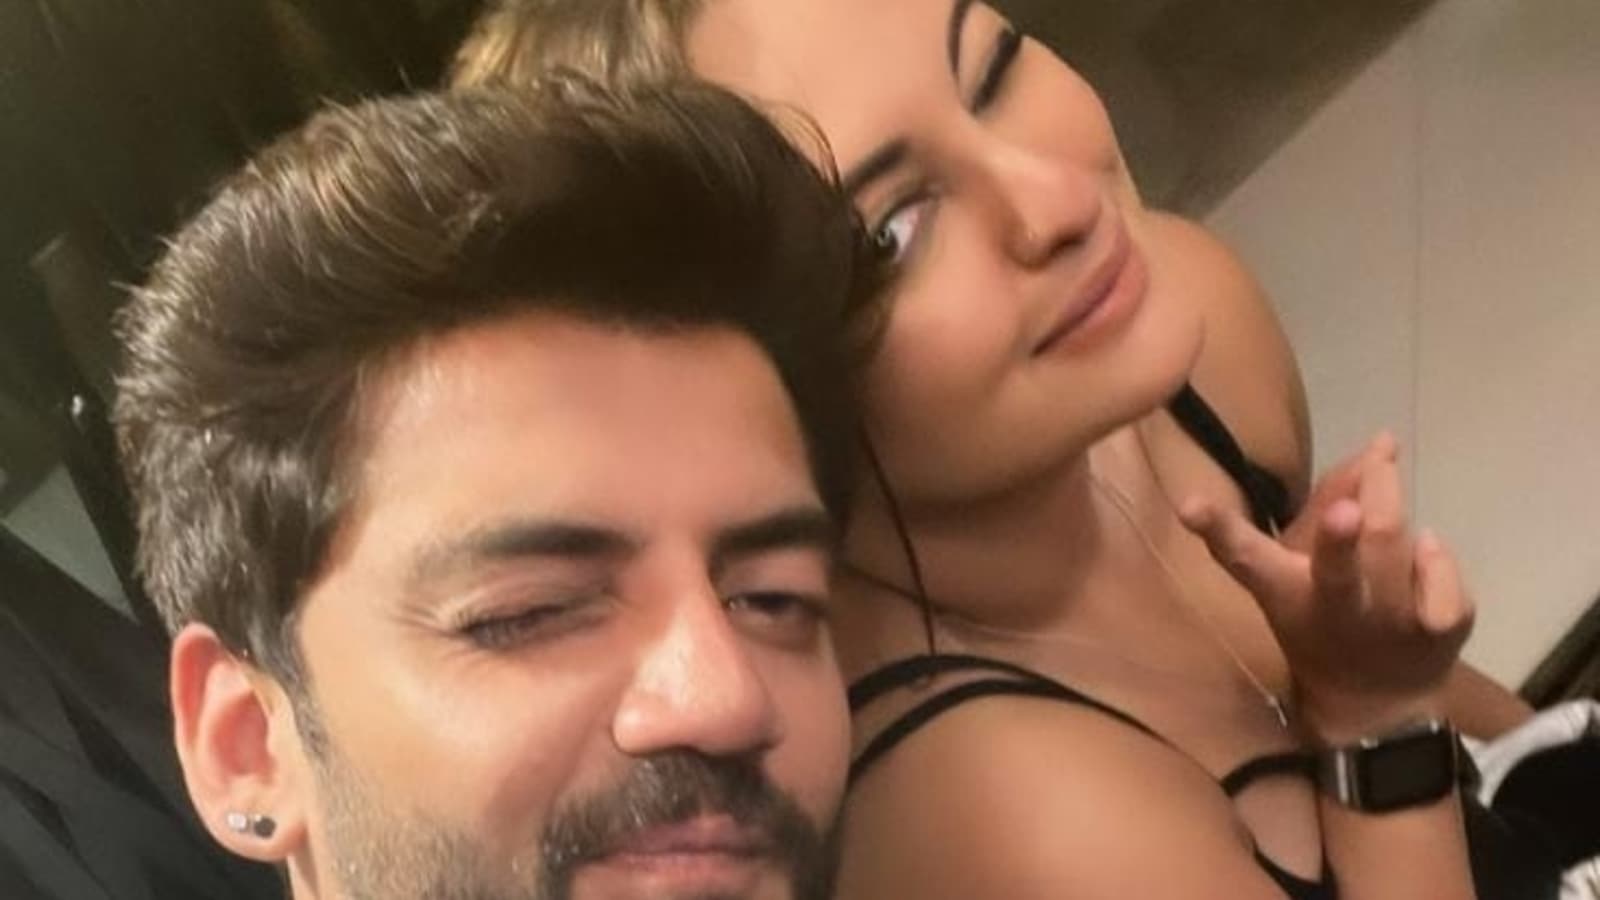 Sonakshi Xxxx Full Hd Videos - Sonakshi winks as she poses with rumoured boyfriend Zaheer Iqbal in new pic  | Bollywood - Hindustan Times